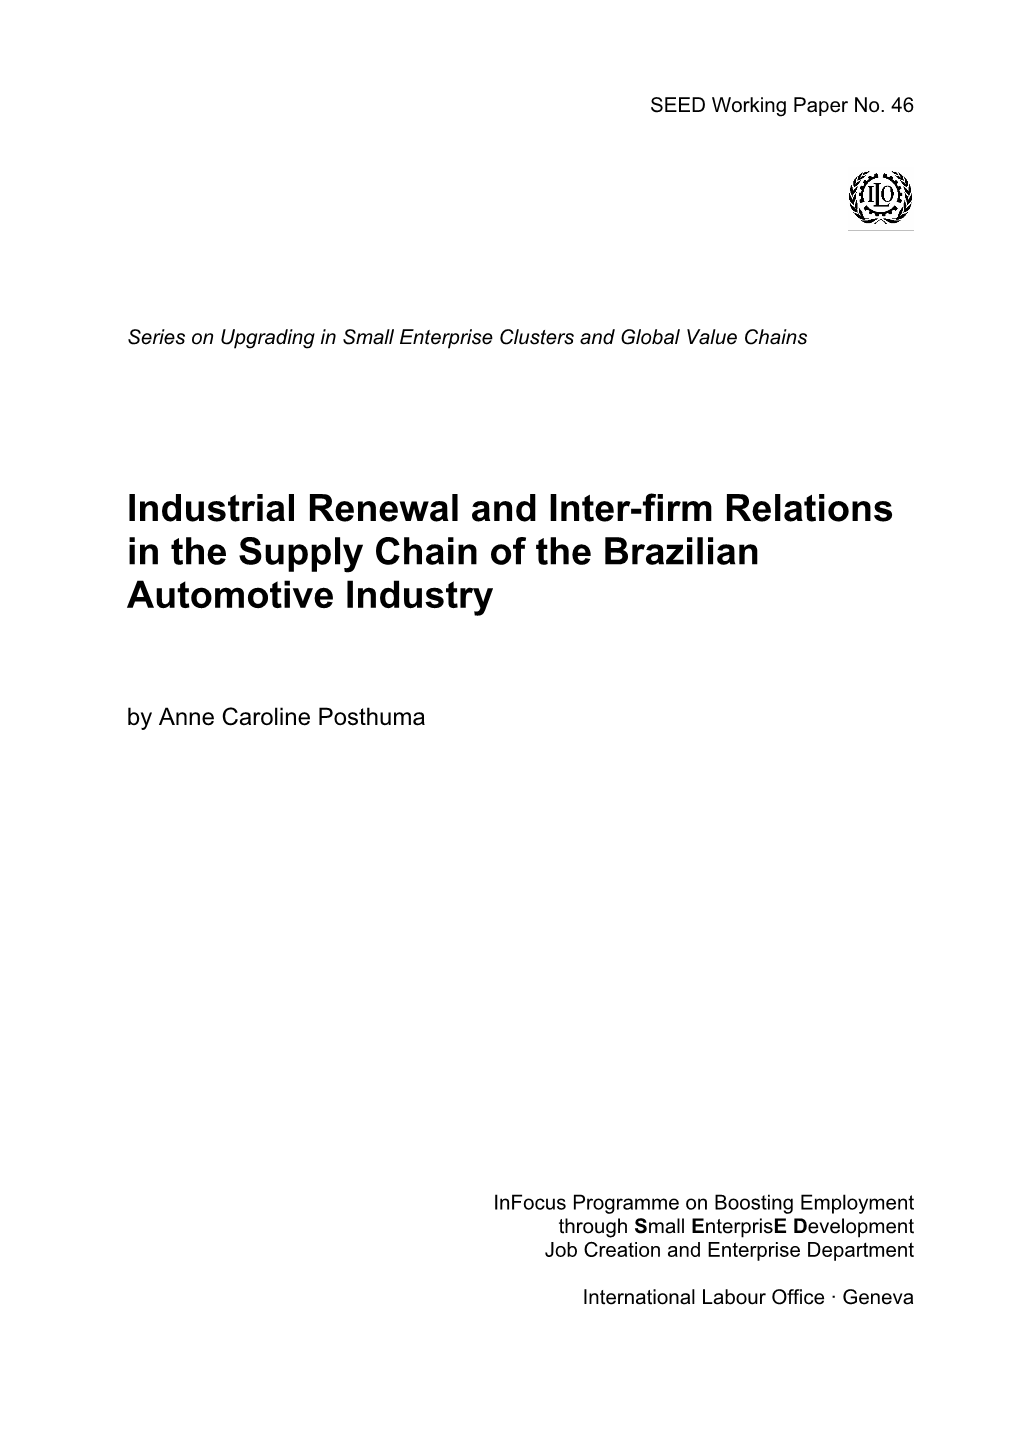 Industrial Renewal and Inter-Firm Relations in the Supply Chain of the Brazilian Automotive Industry